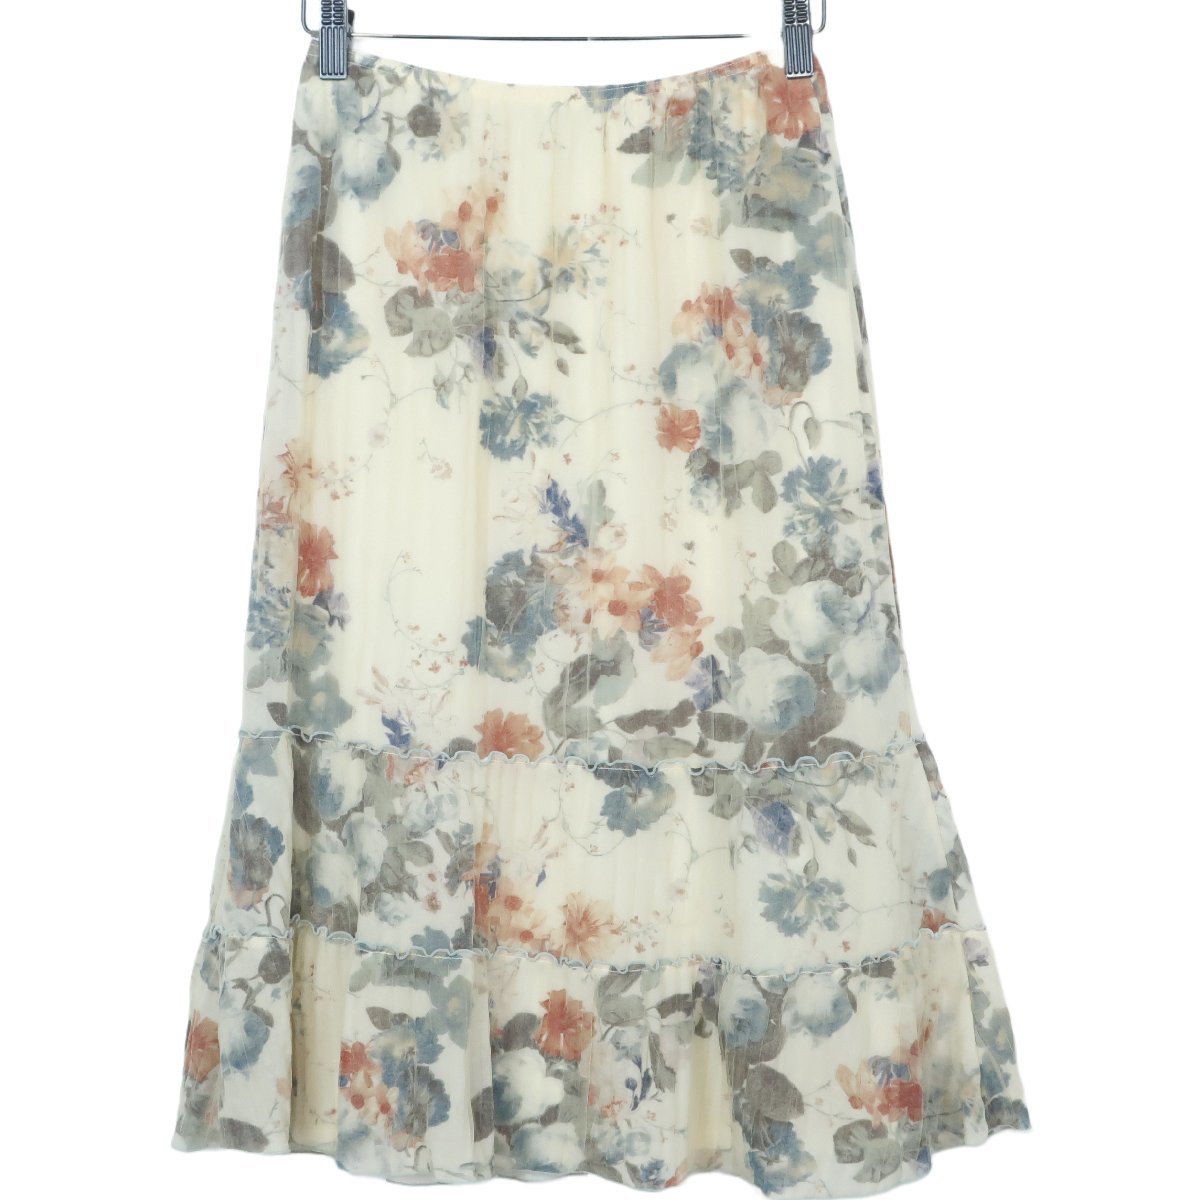 [ beautiful goods ] L'Est Rose * gathered skirt size M waist total rubber!.. floral print! cream color series z1488